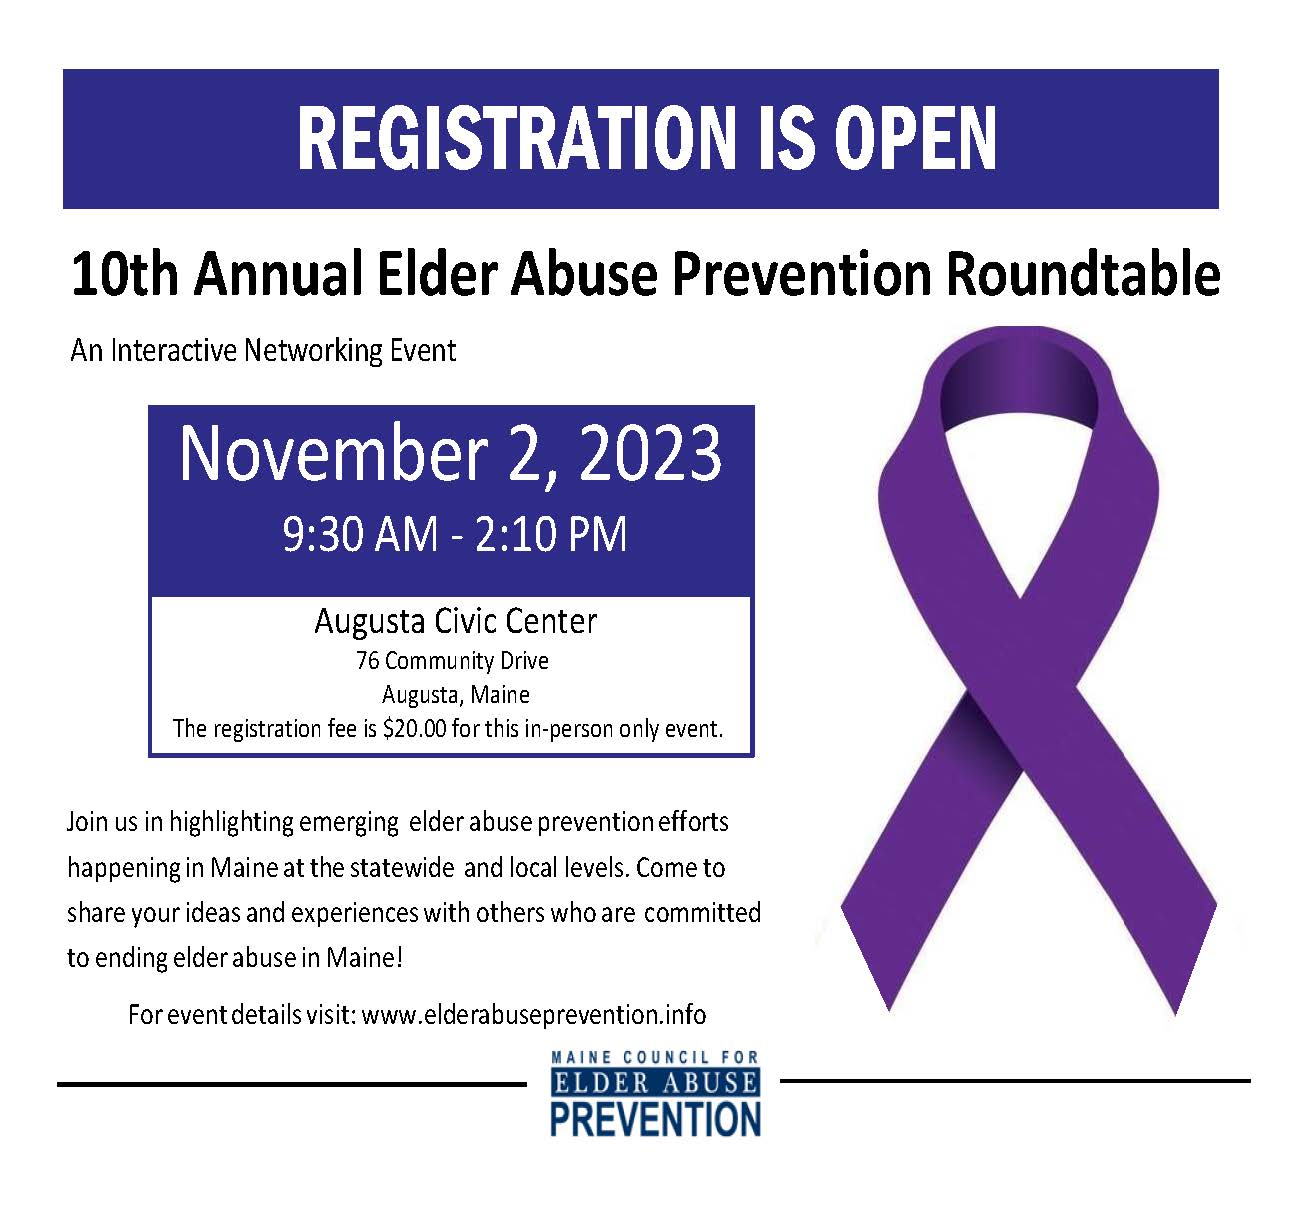 Roundtable Registration is Open